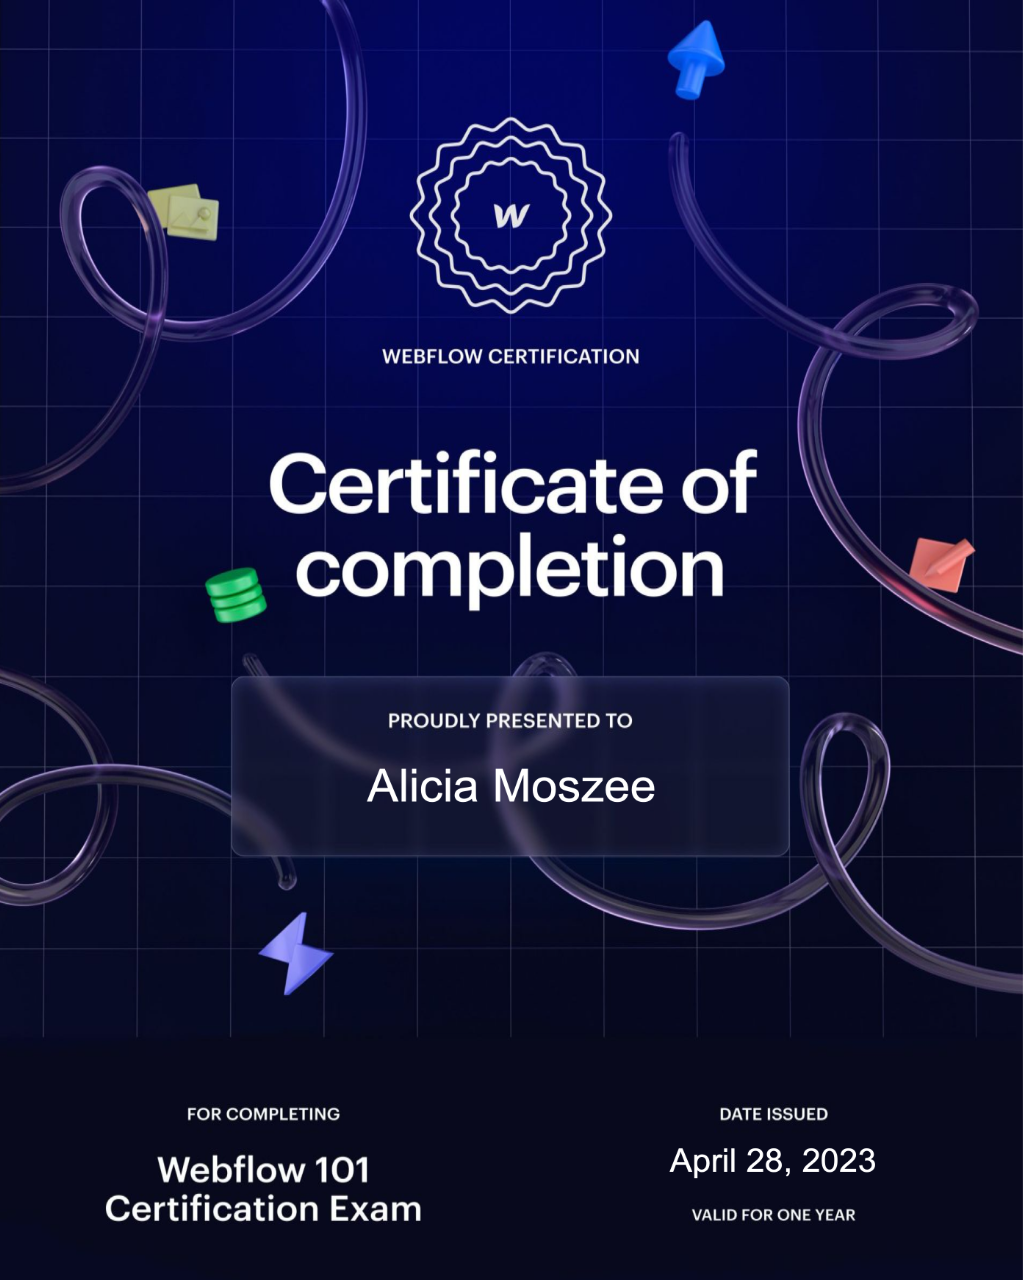 A certificate of completion for a webflow 101 certification exam